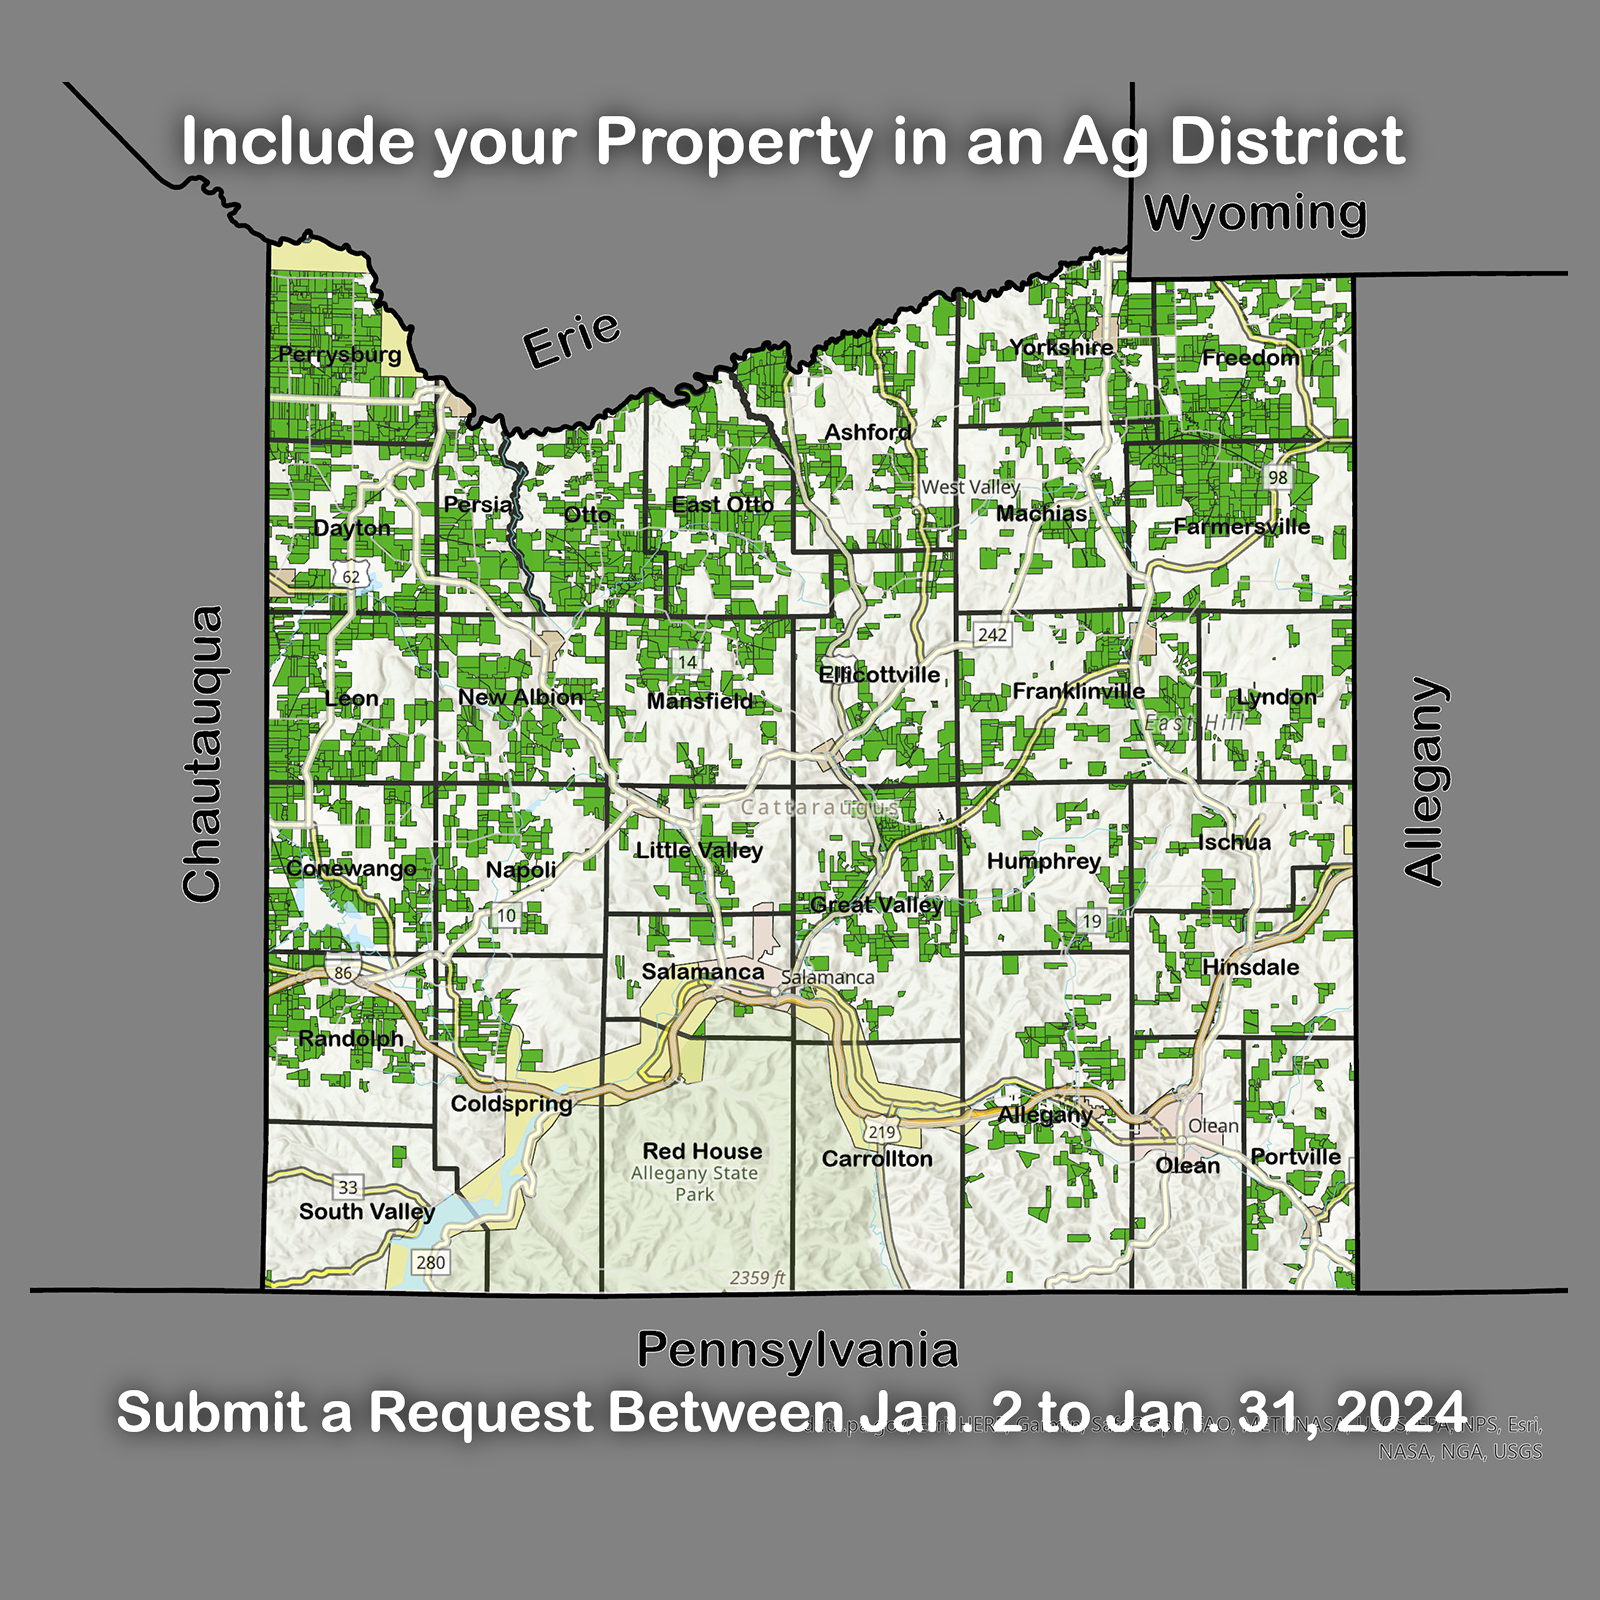 Include your property in an Ag District. Submit a request between January 2 to January 31, 2024